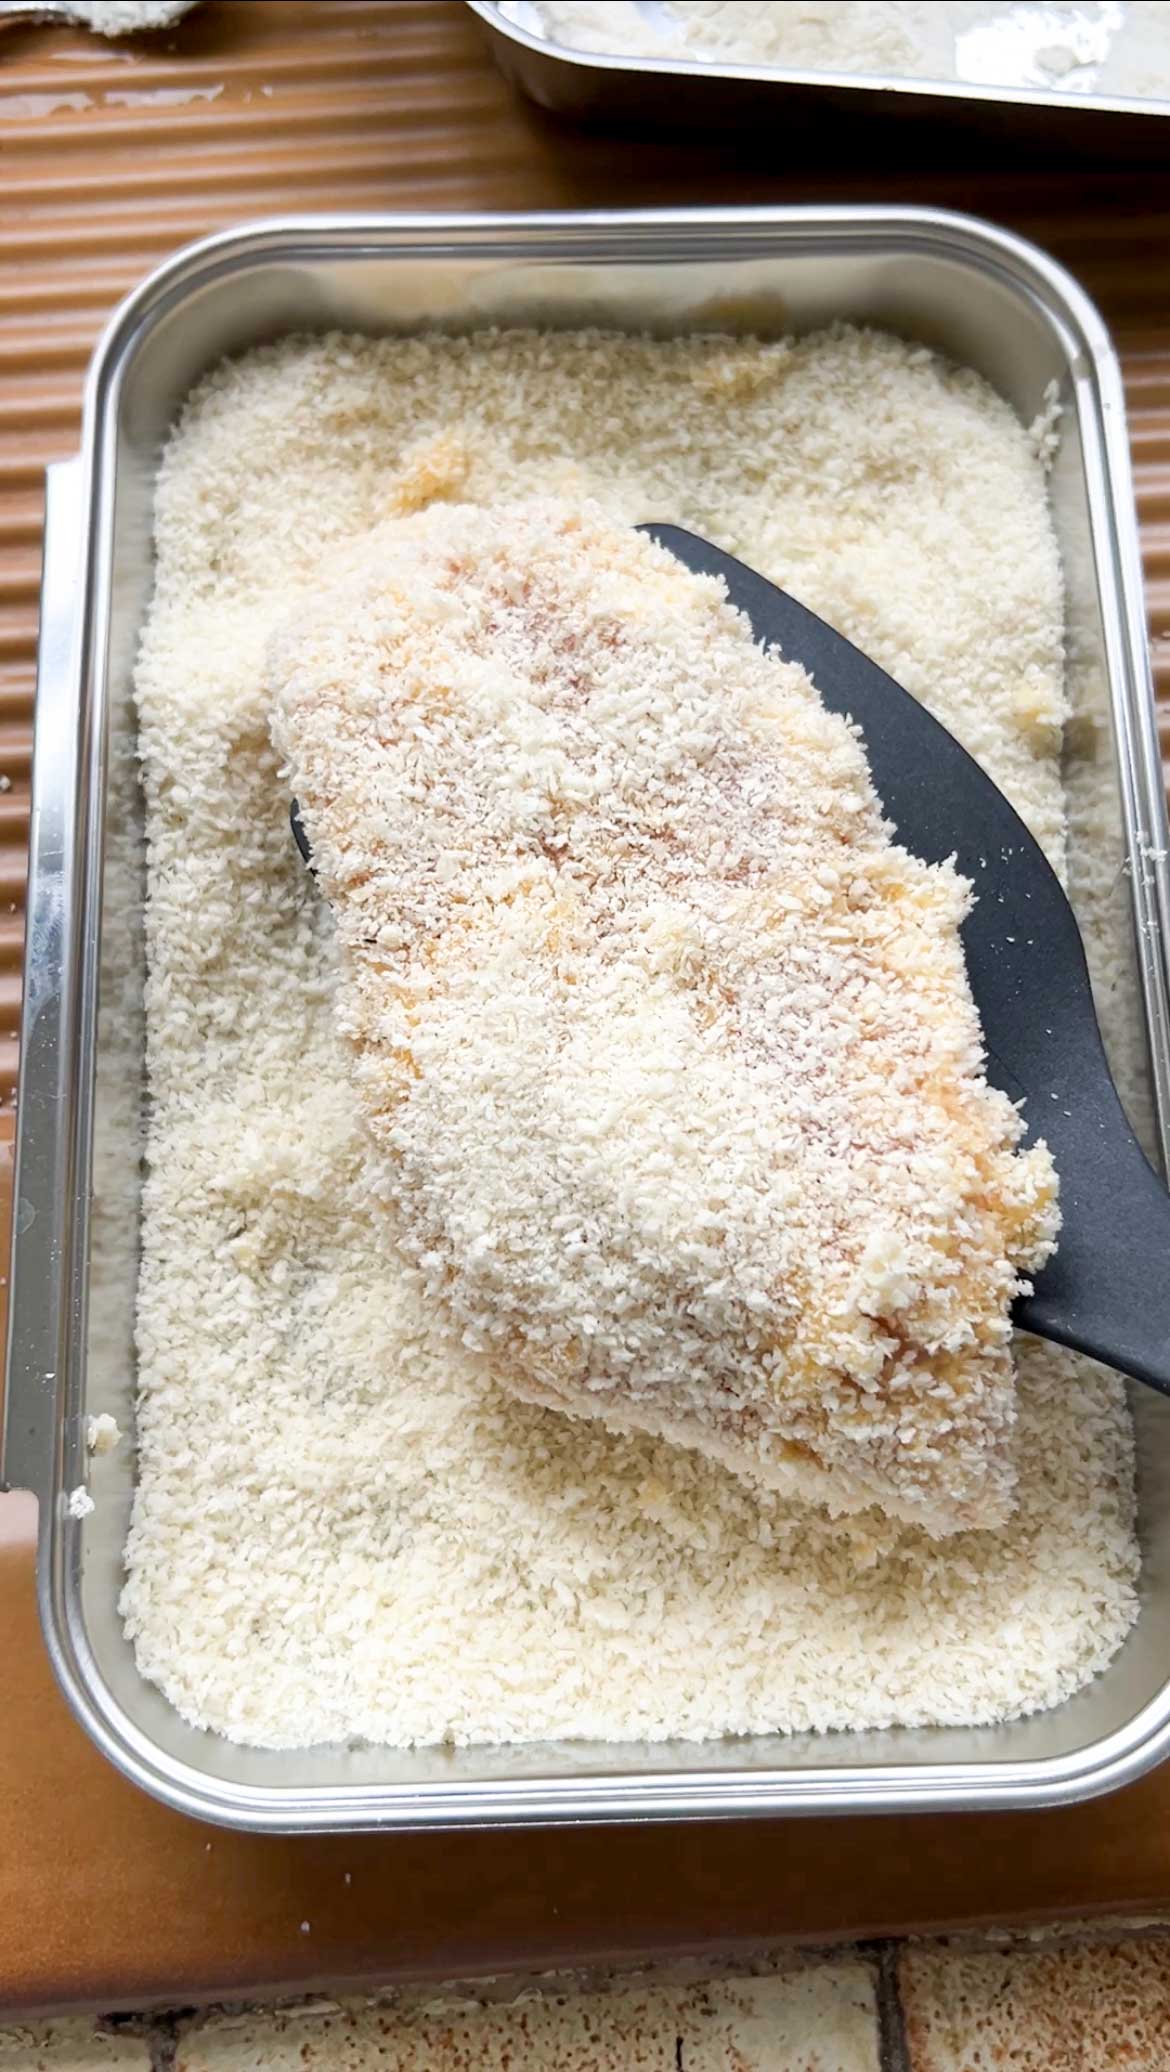 Chicken fillet held by tongs and dipped in a dish of Panko breadcrumbs.